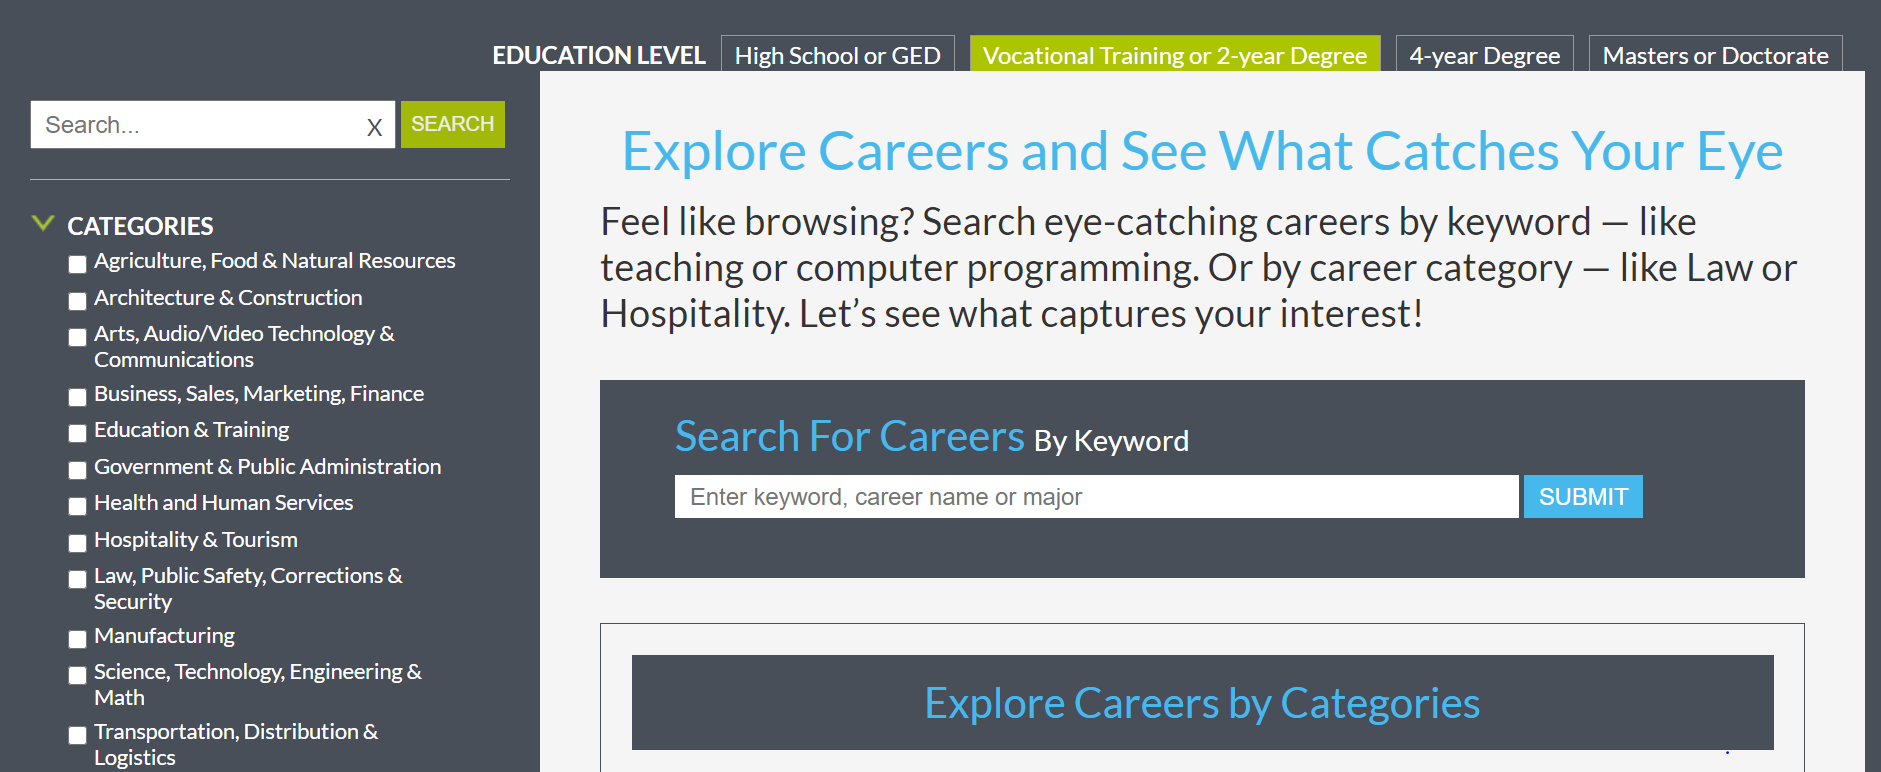 mefa pathway career search by education level